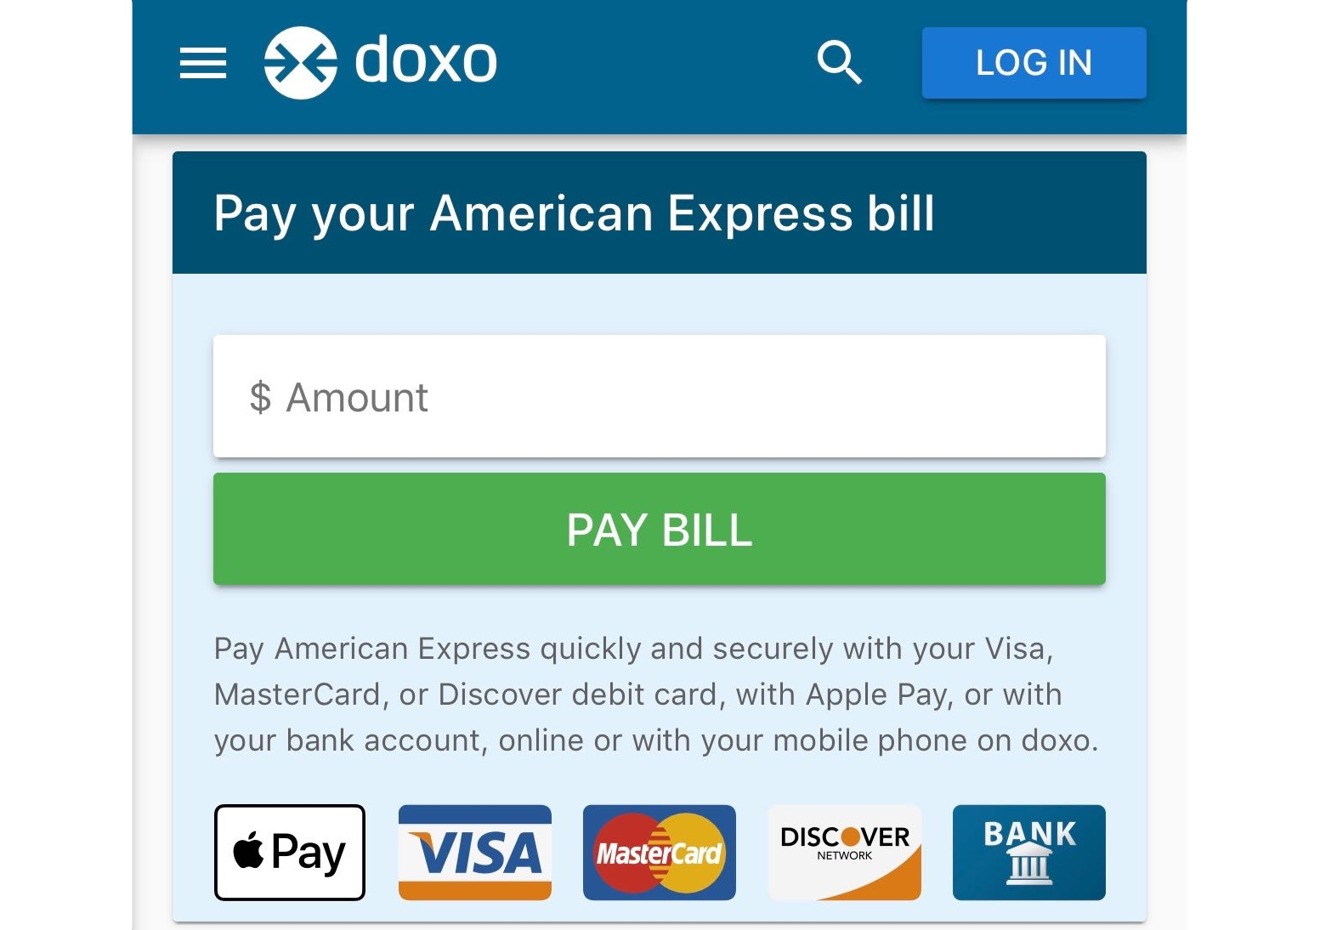 Bill payment app doxo adds Apple Pay option to pay 45,000 services